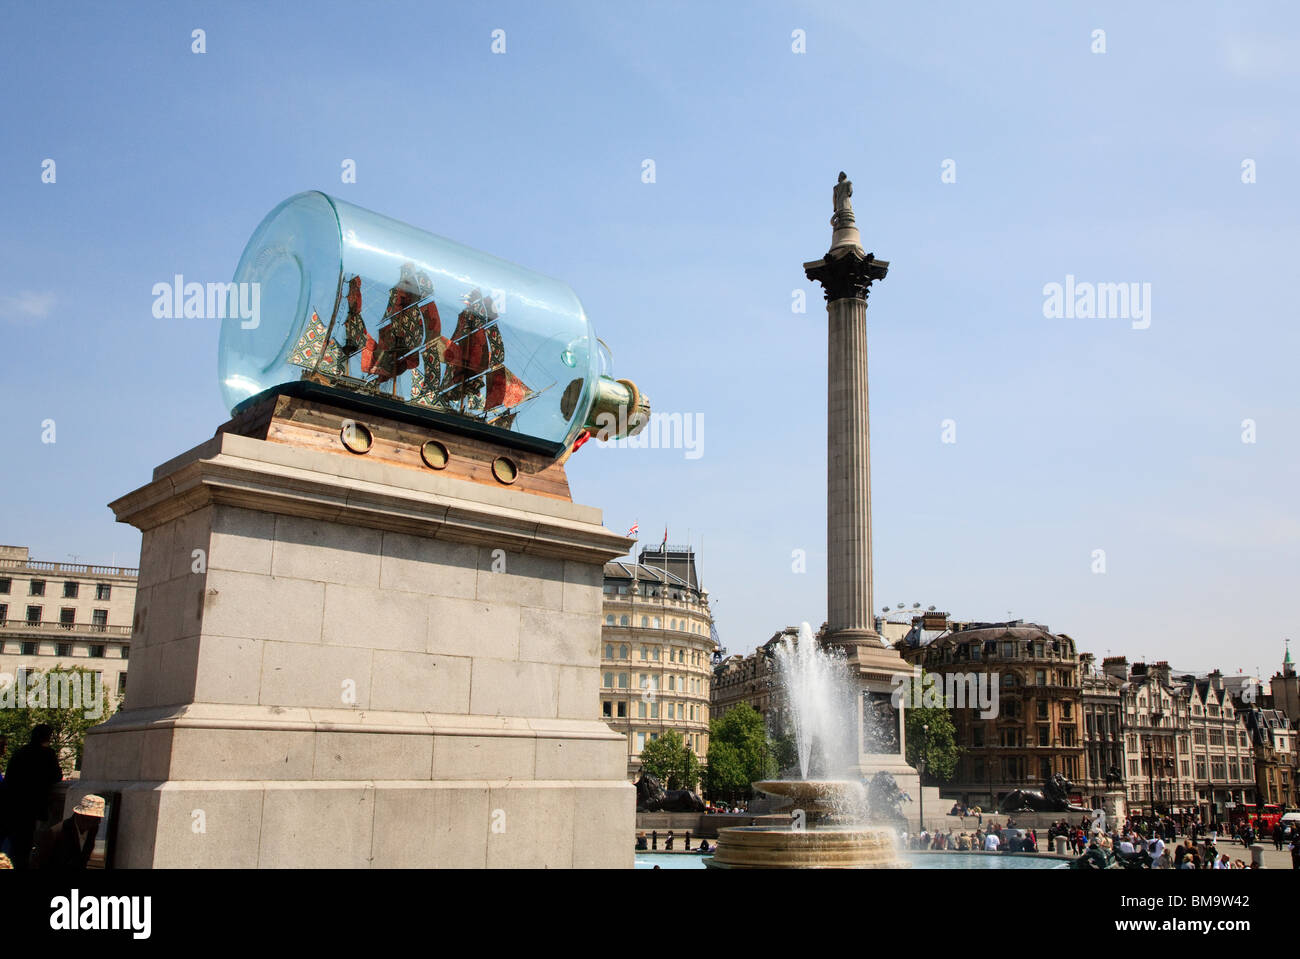 Nelson's Ship in a bottle by Yinka Shonibare on the fourth plinth in Trafalgar Square with Nelson's column in the background Stock Photo